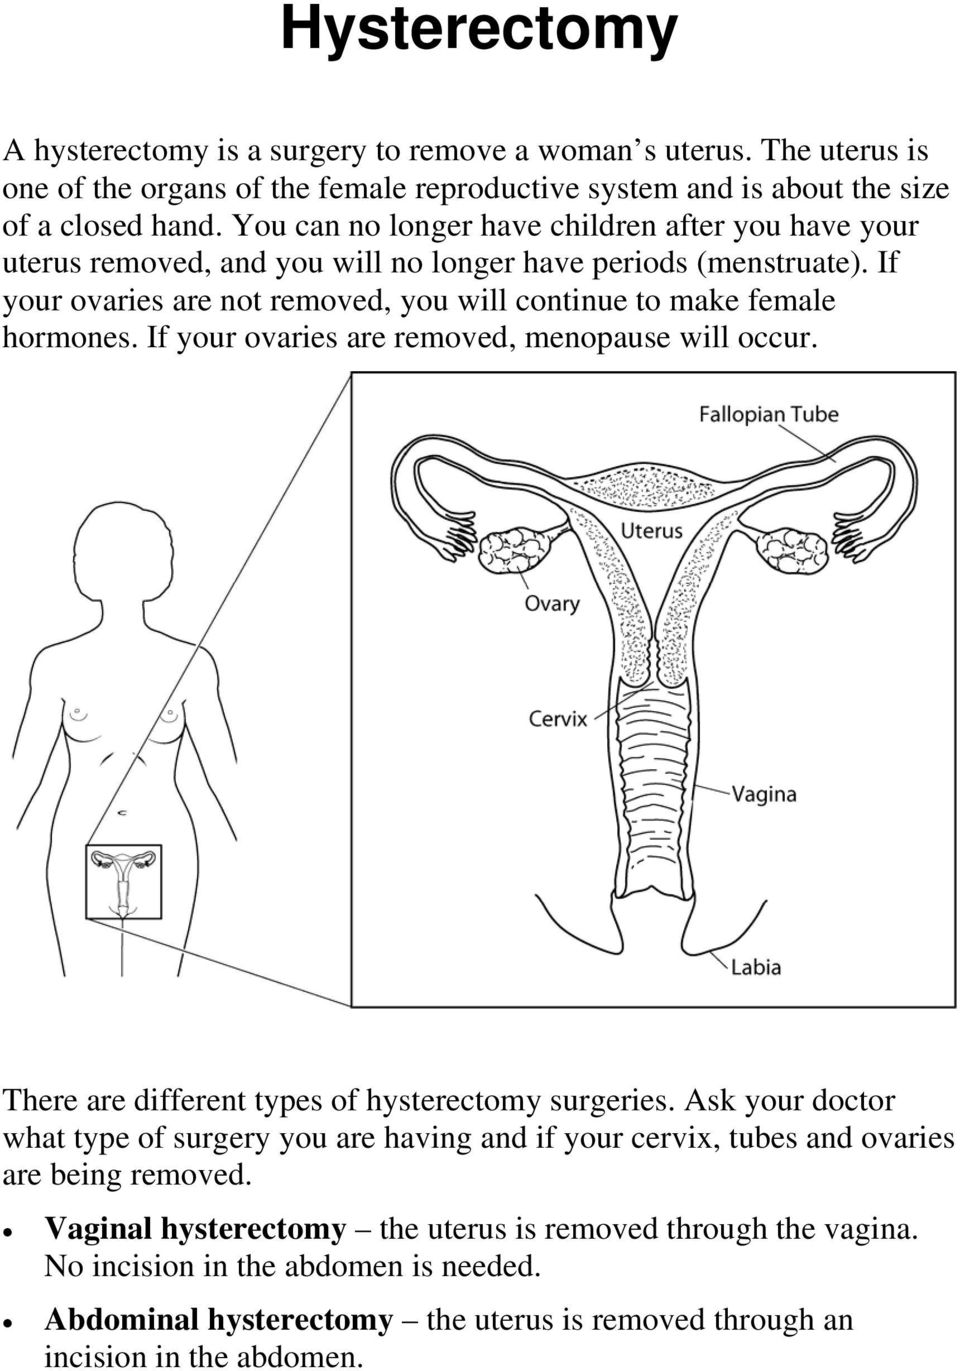 If your ovaries are not removed, you will continue to make female hormones. If your ovaries are removed, menopause will occur. There are different types of hysterectomy surgeries.